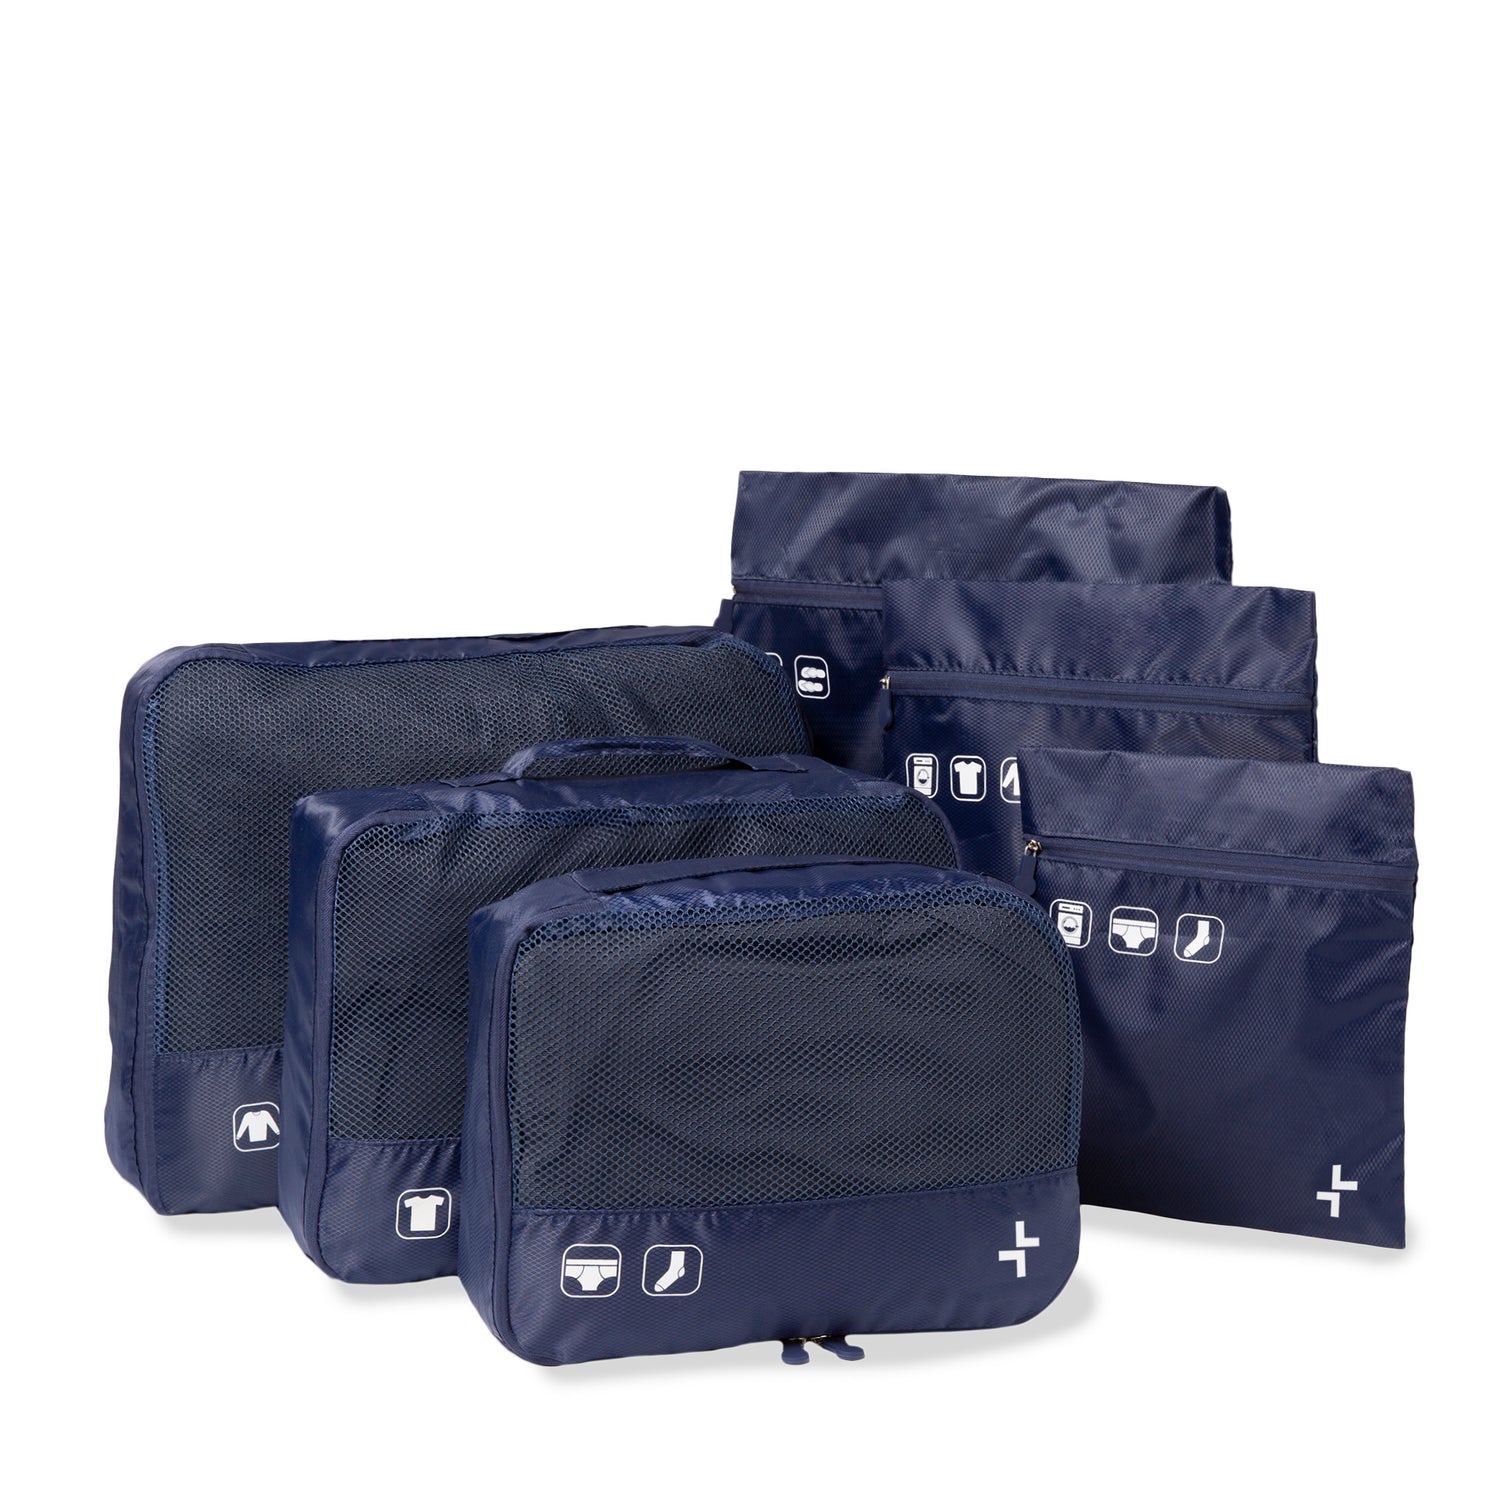 3 navy blue packing cubes and 3 navy blue storage bags designed by tracker all in a row showing its half mesh half polyester materials and icons of socks and undergarments.